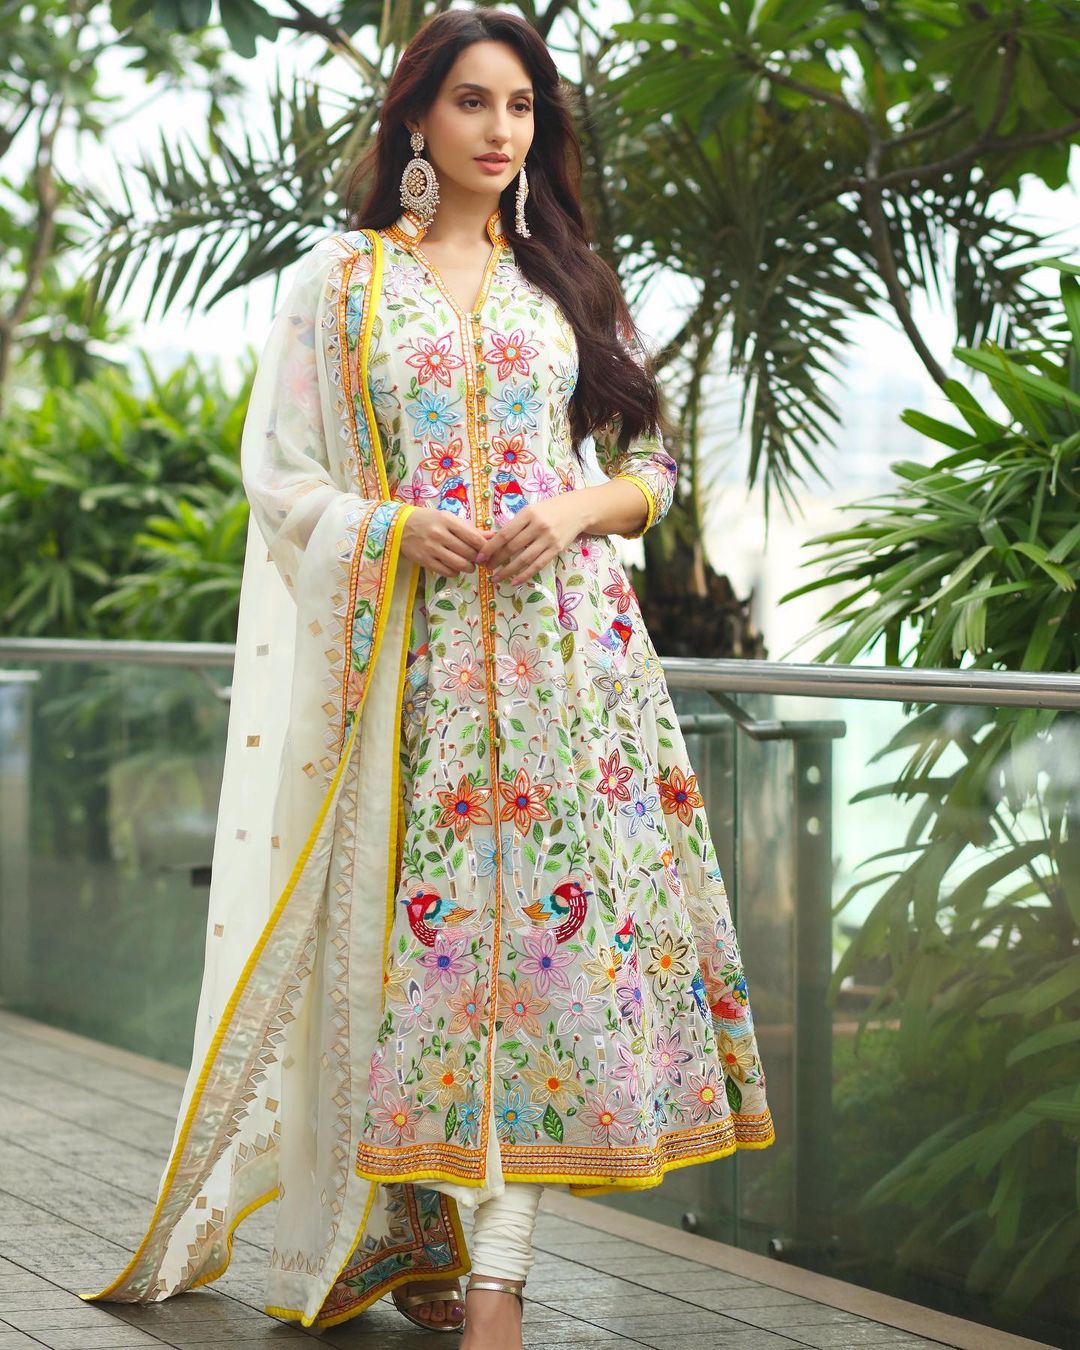 Nora Fatehi looks chic in the floral suit.